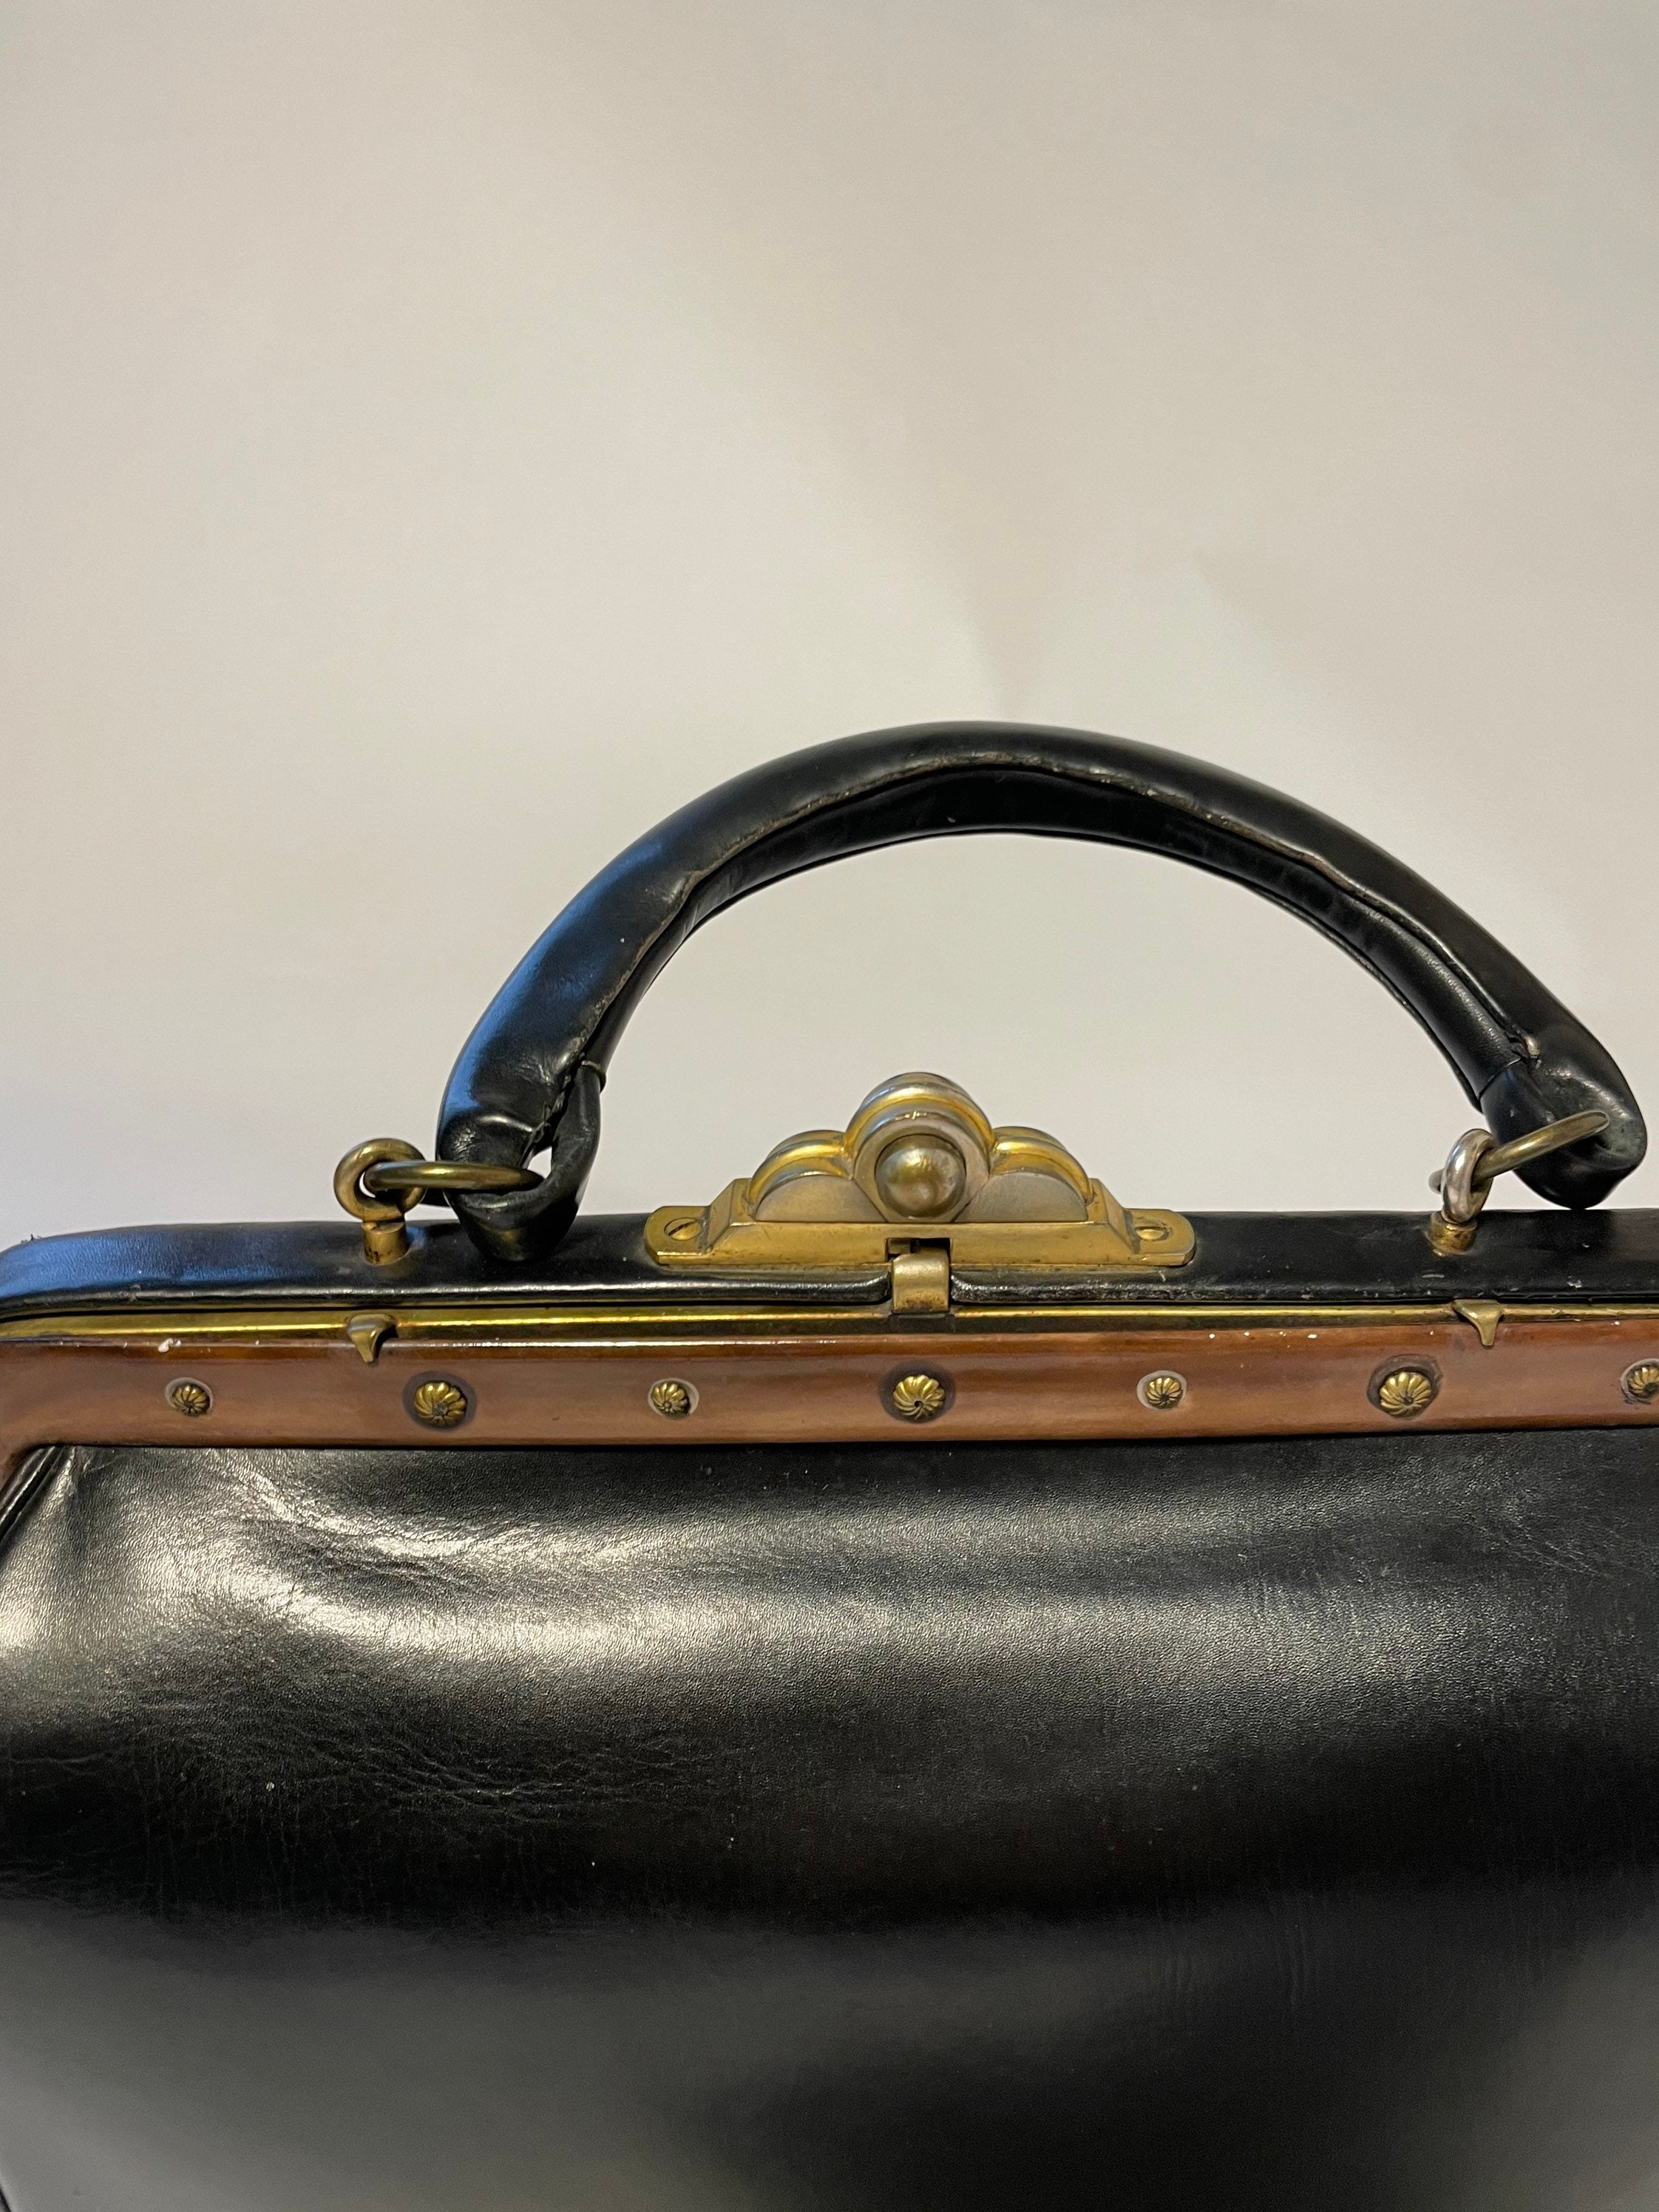 7 images Roberta di Camerino Black Leather Doctor Bag - MRS Couture